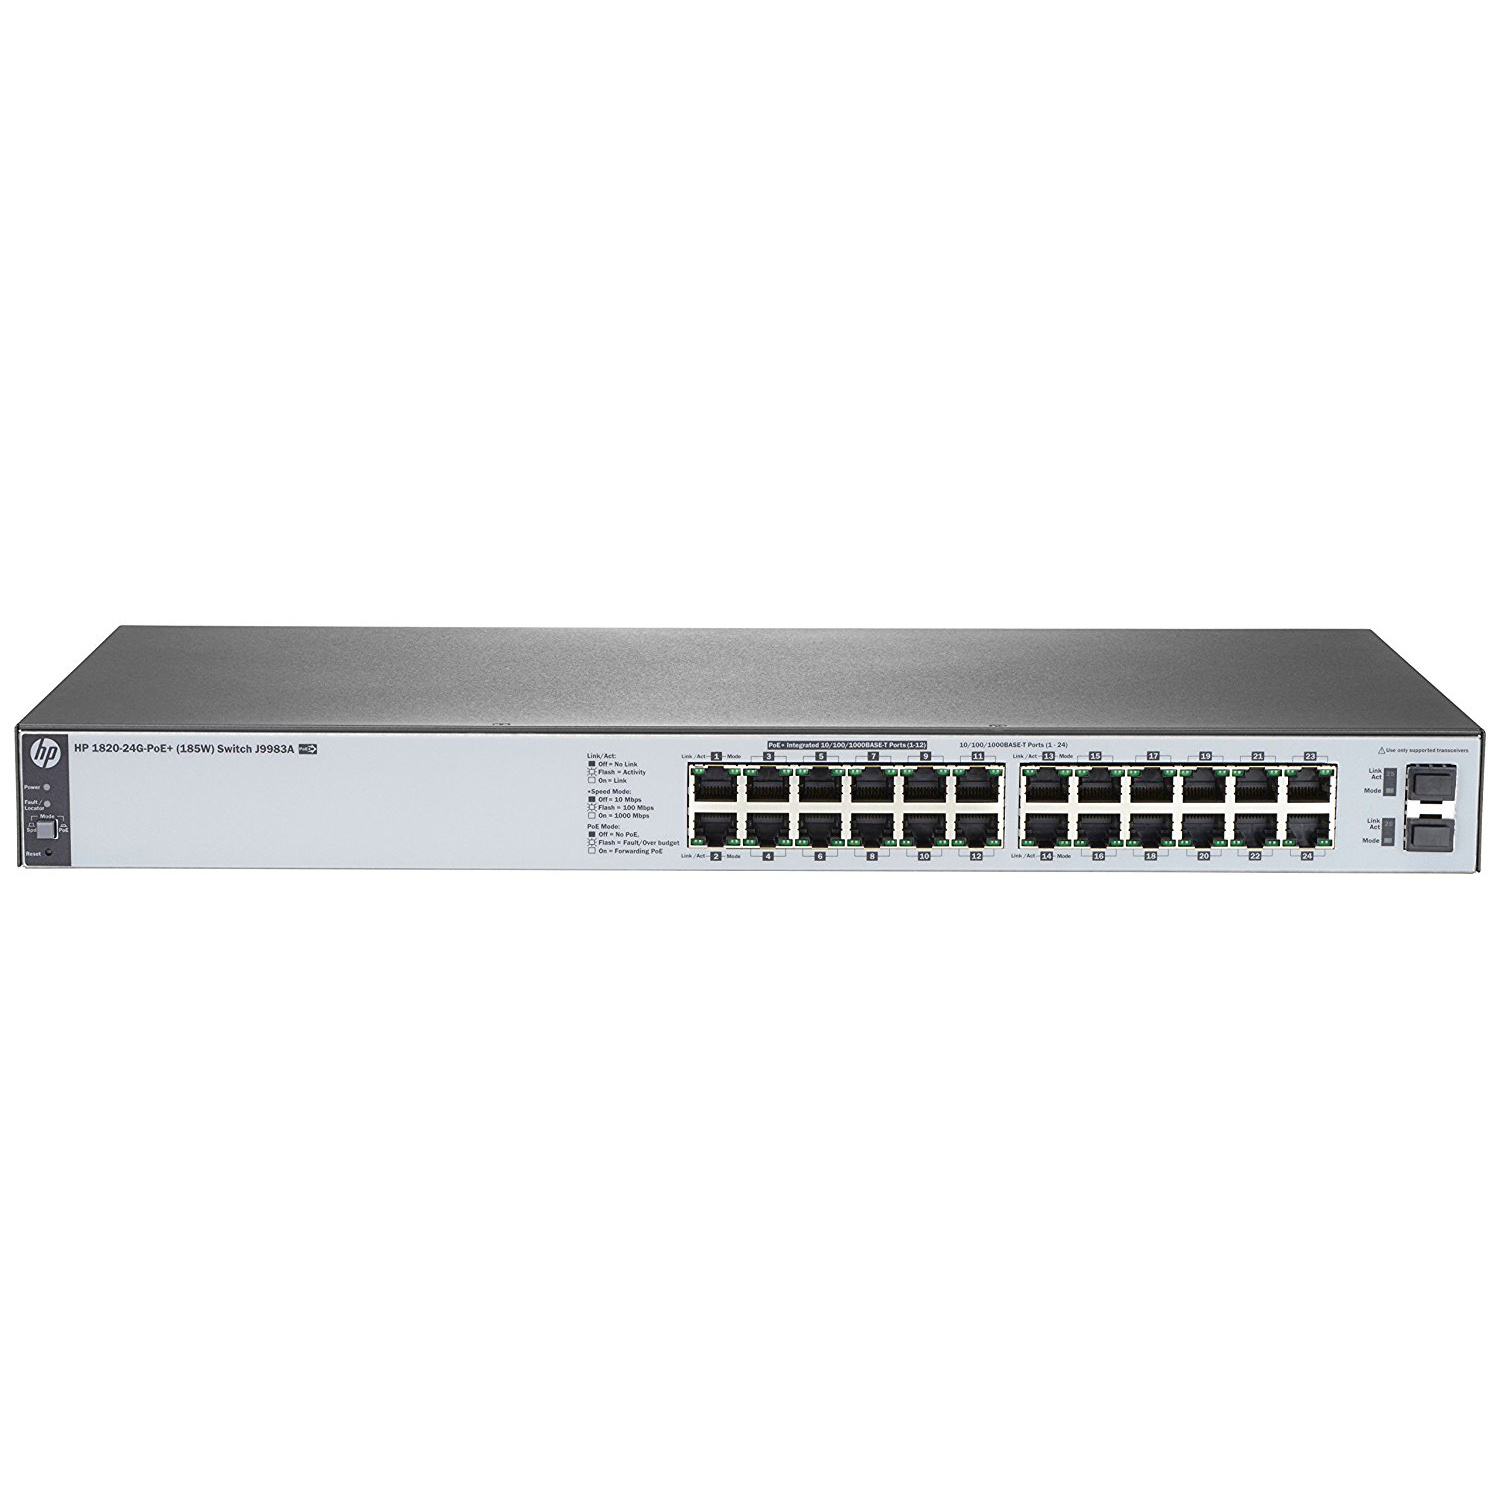 Thiết bị chuyển mạch HPE J9983A OfficeConnect 1820 24G PoE+ (185W) Switch